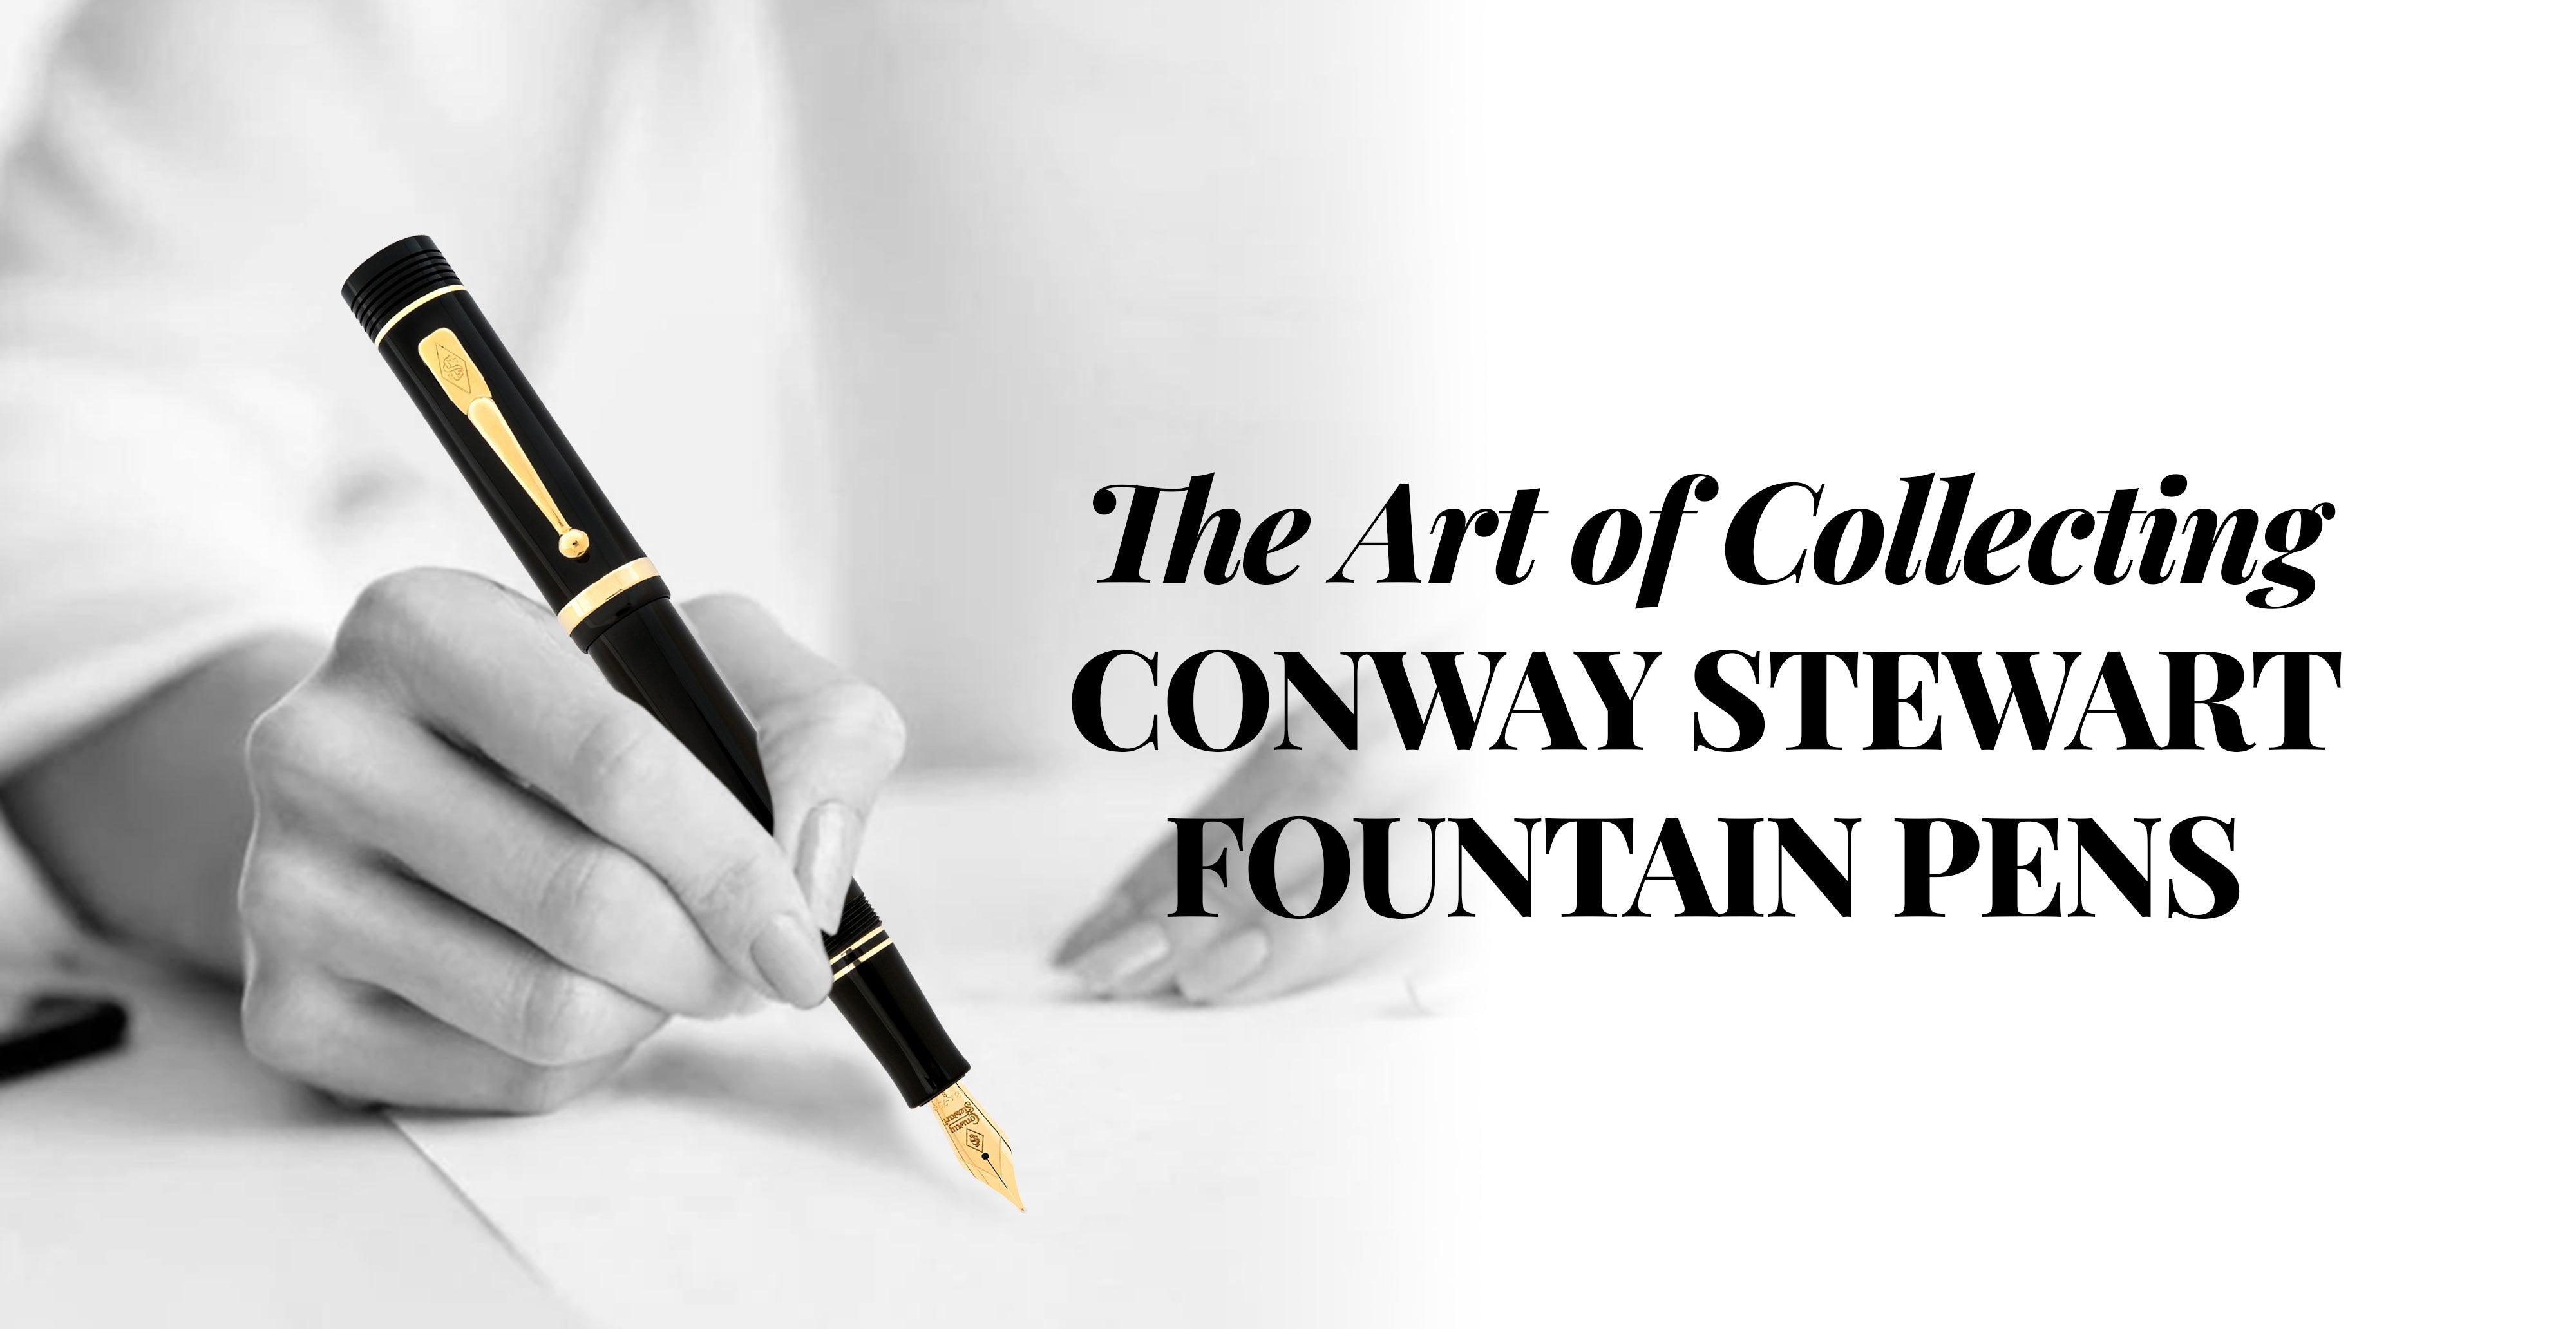 What Does it Mean to be a Collector of Conway Stewart Fountain Pens? - Conway Stewart